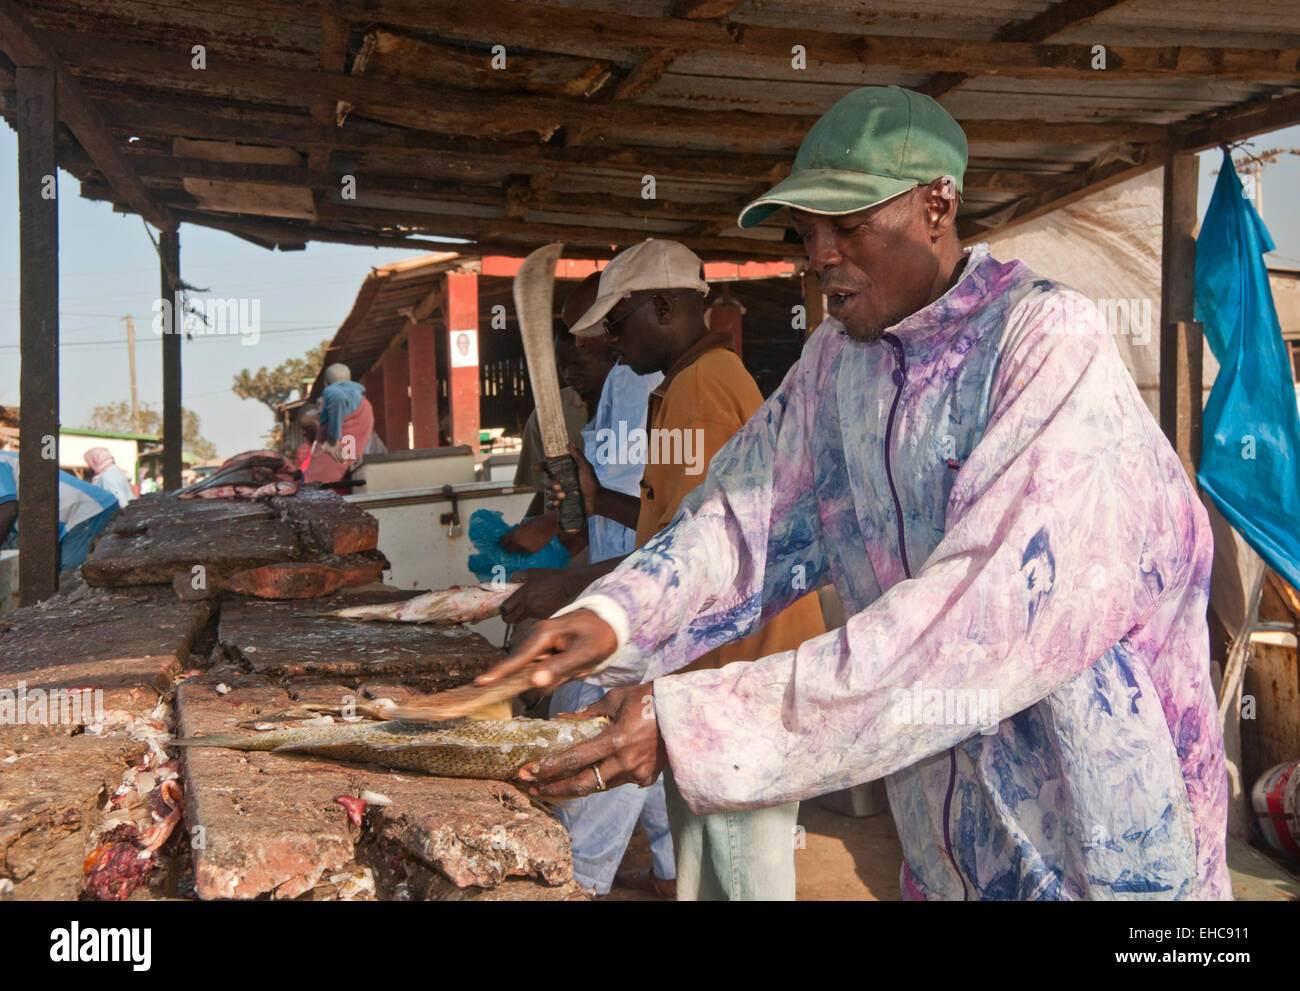 Descaling & Preparing Fish to be Dried, Tanji Fishing Village, The Gambia,West Africa Stock Photo